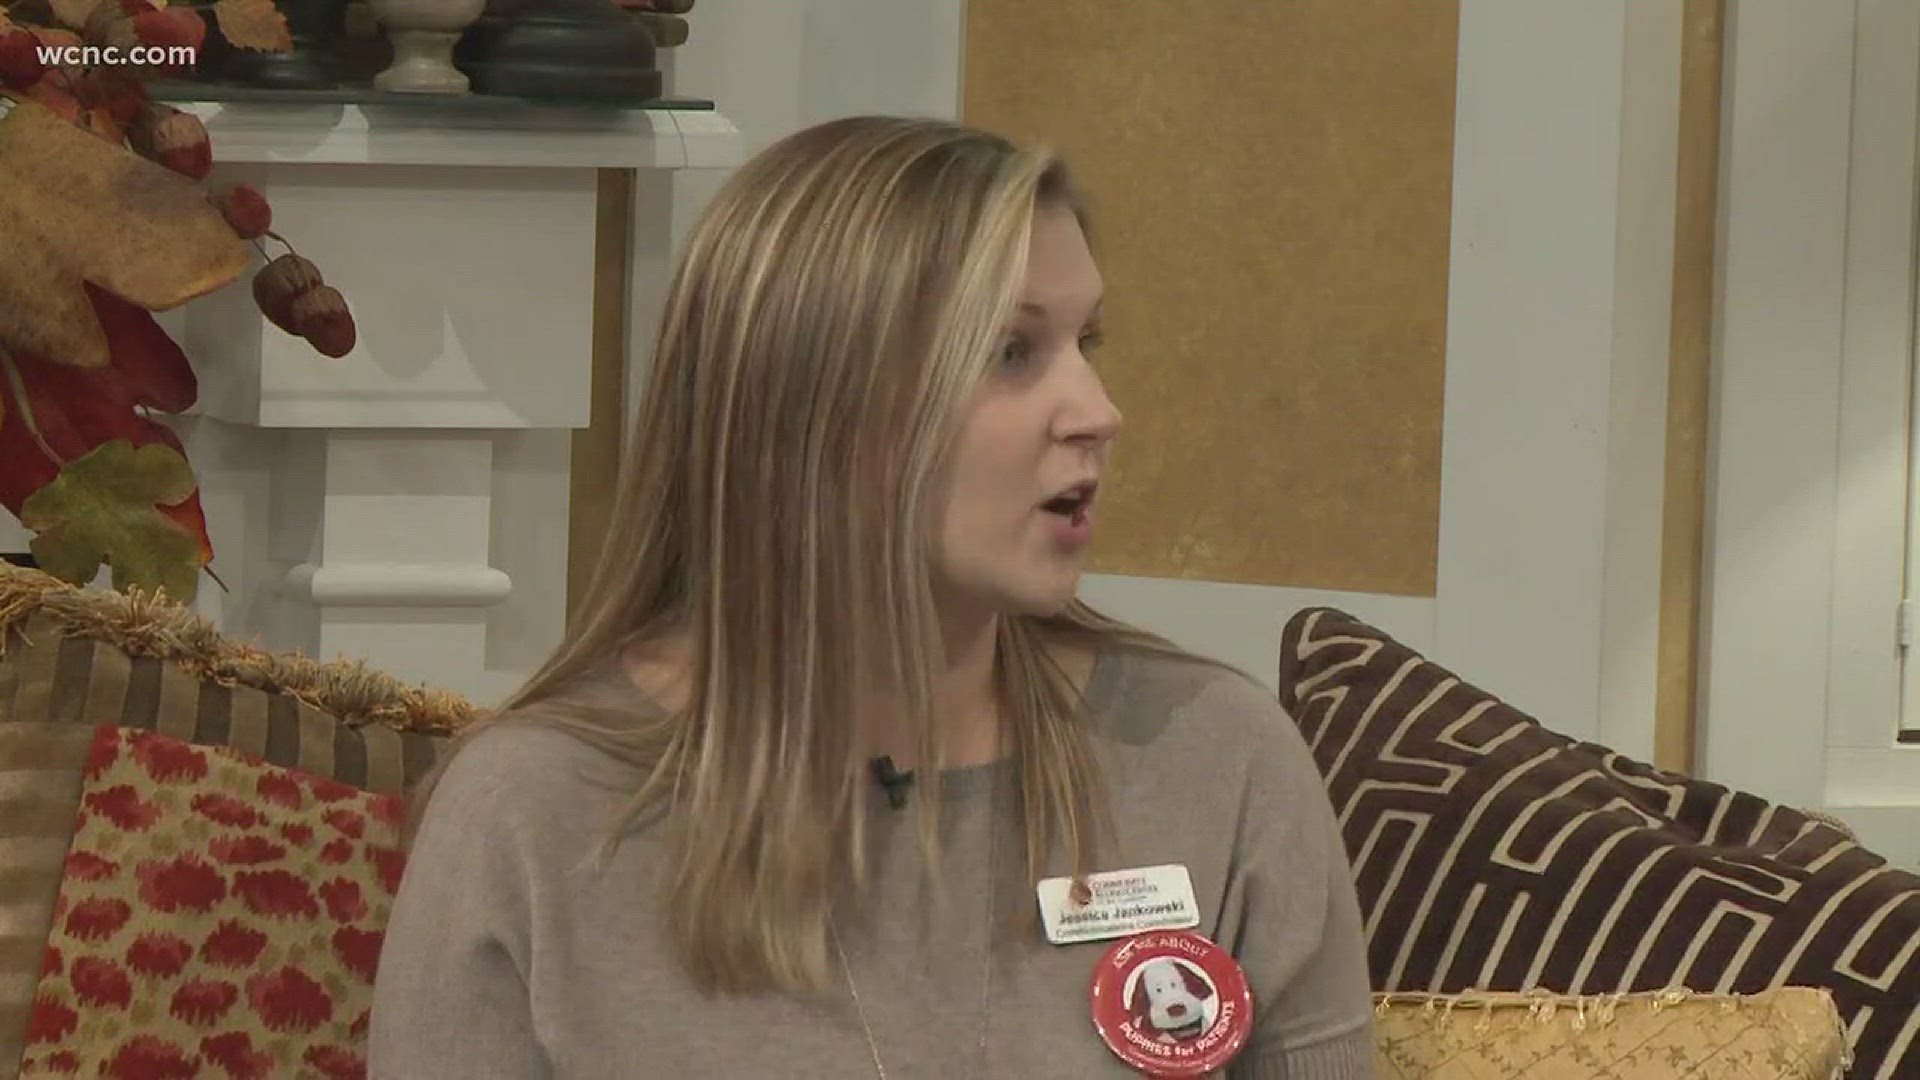 Jessica Jankowski from  Community blood center of the Carolinas tell us more